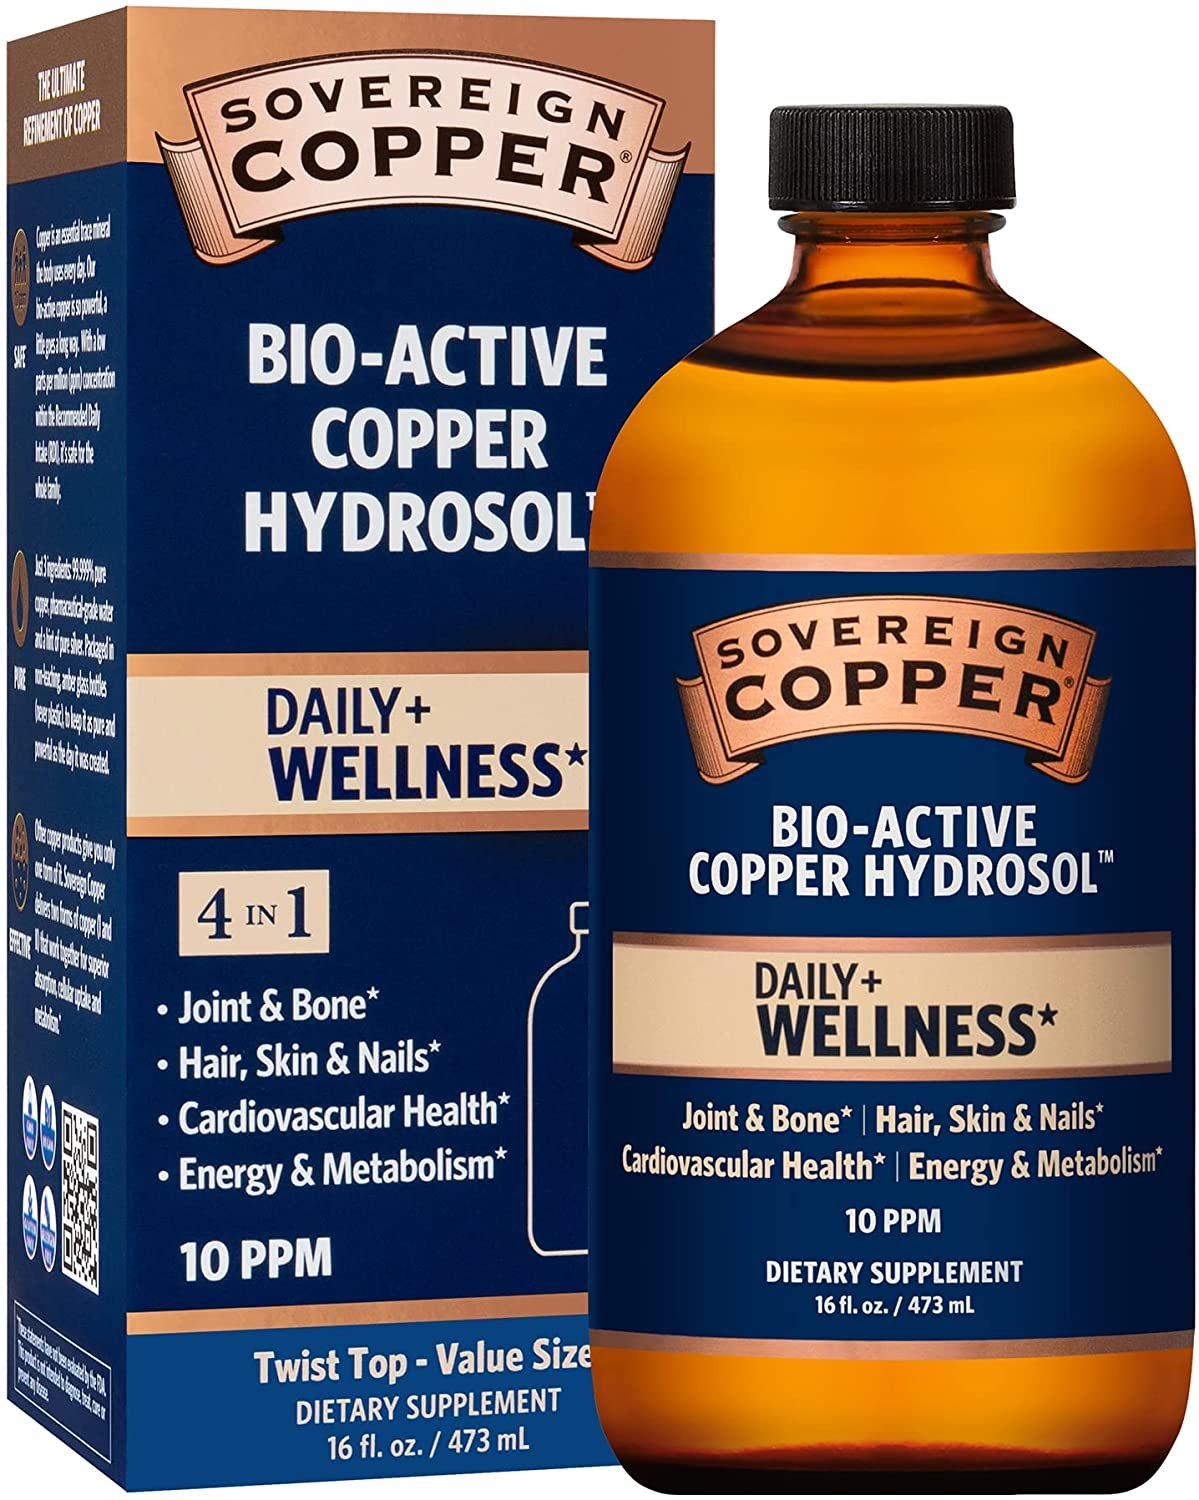 Sovereign Copper Bio-Active Copper Hydrosol, Daily+ 4-in-1 Wellness Supplement for Joint and Bone*, Hair, Skin and Nails*, Cardiovascular Health* and Energy and Metabolism Support